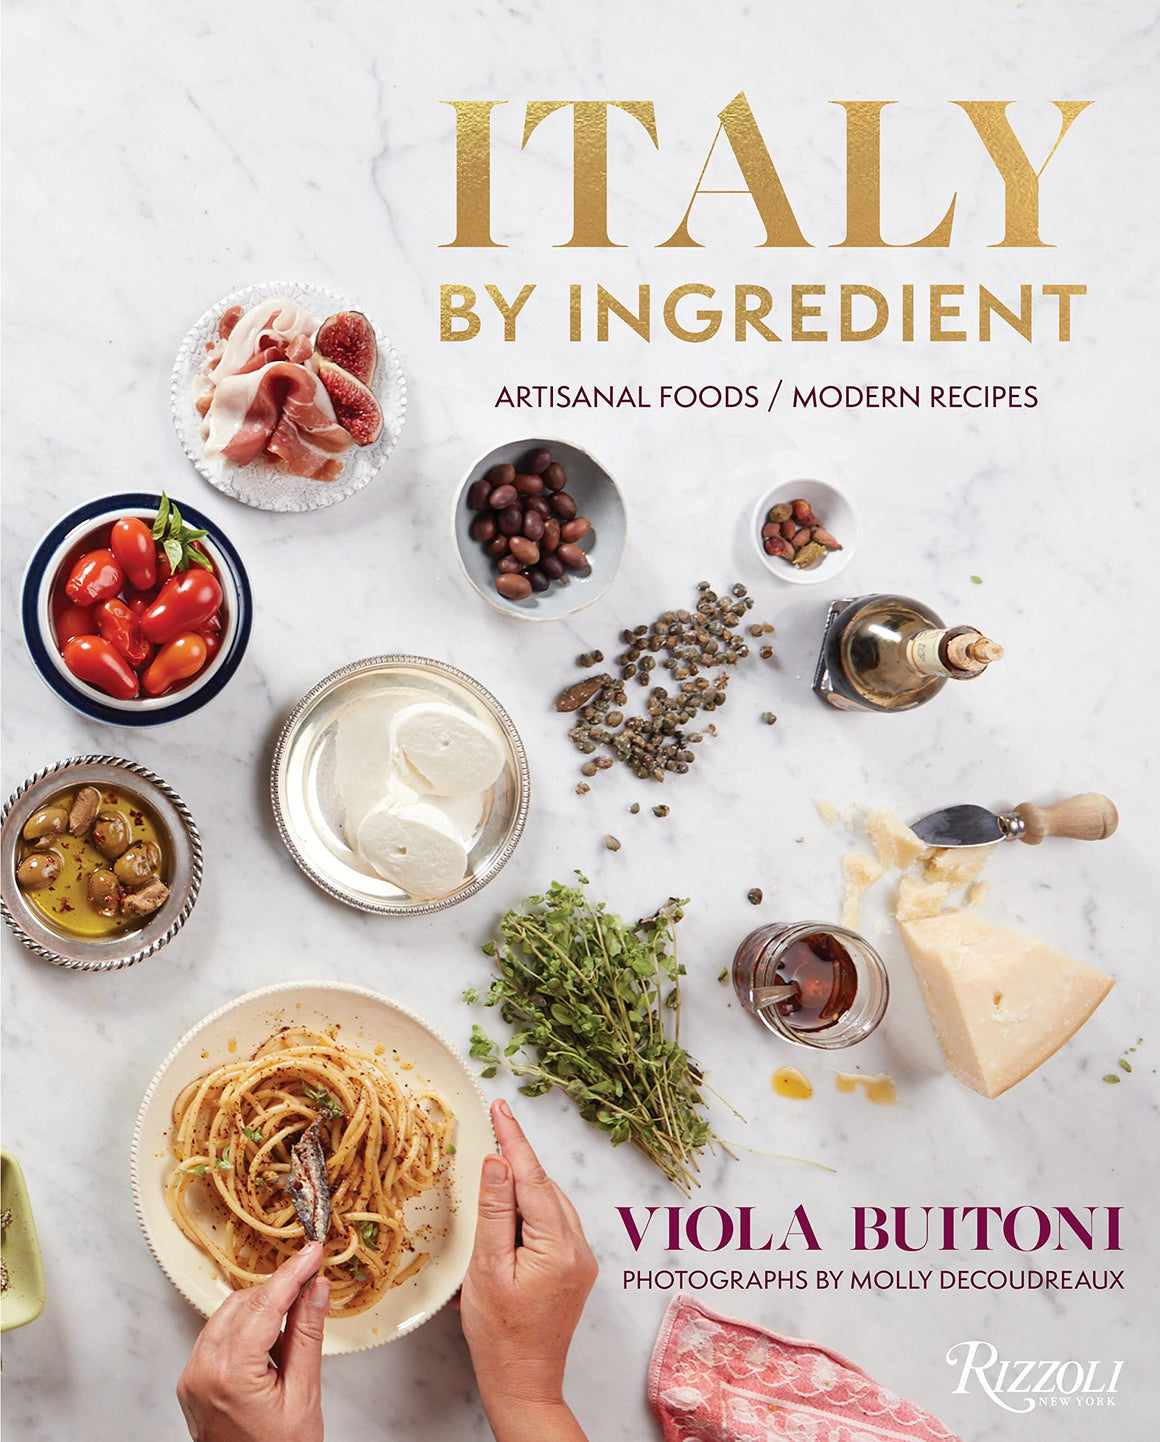 Italy by Ingredient: Artisanal Foods, Modern Recipes *SIGNED* (Viola Buitoni)